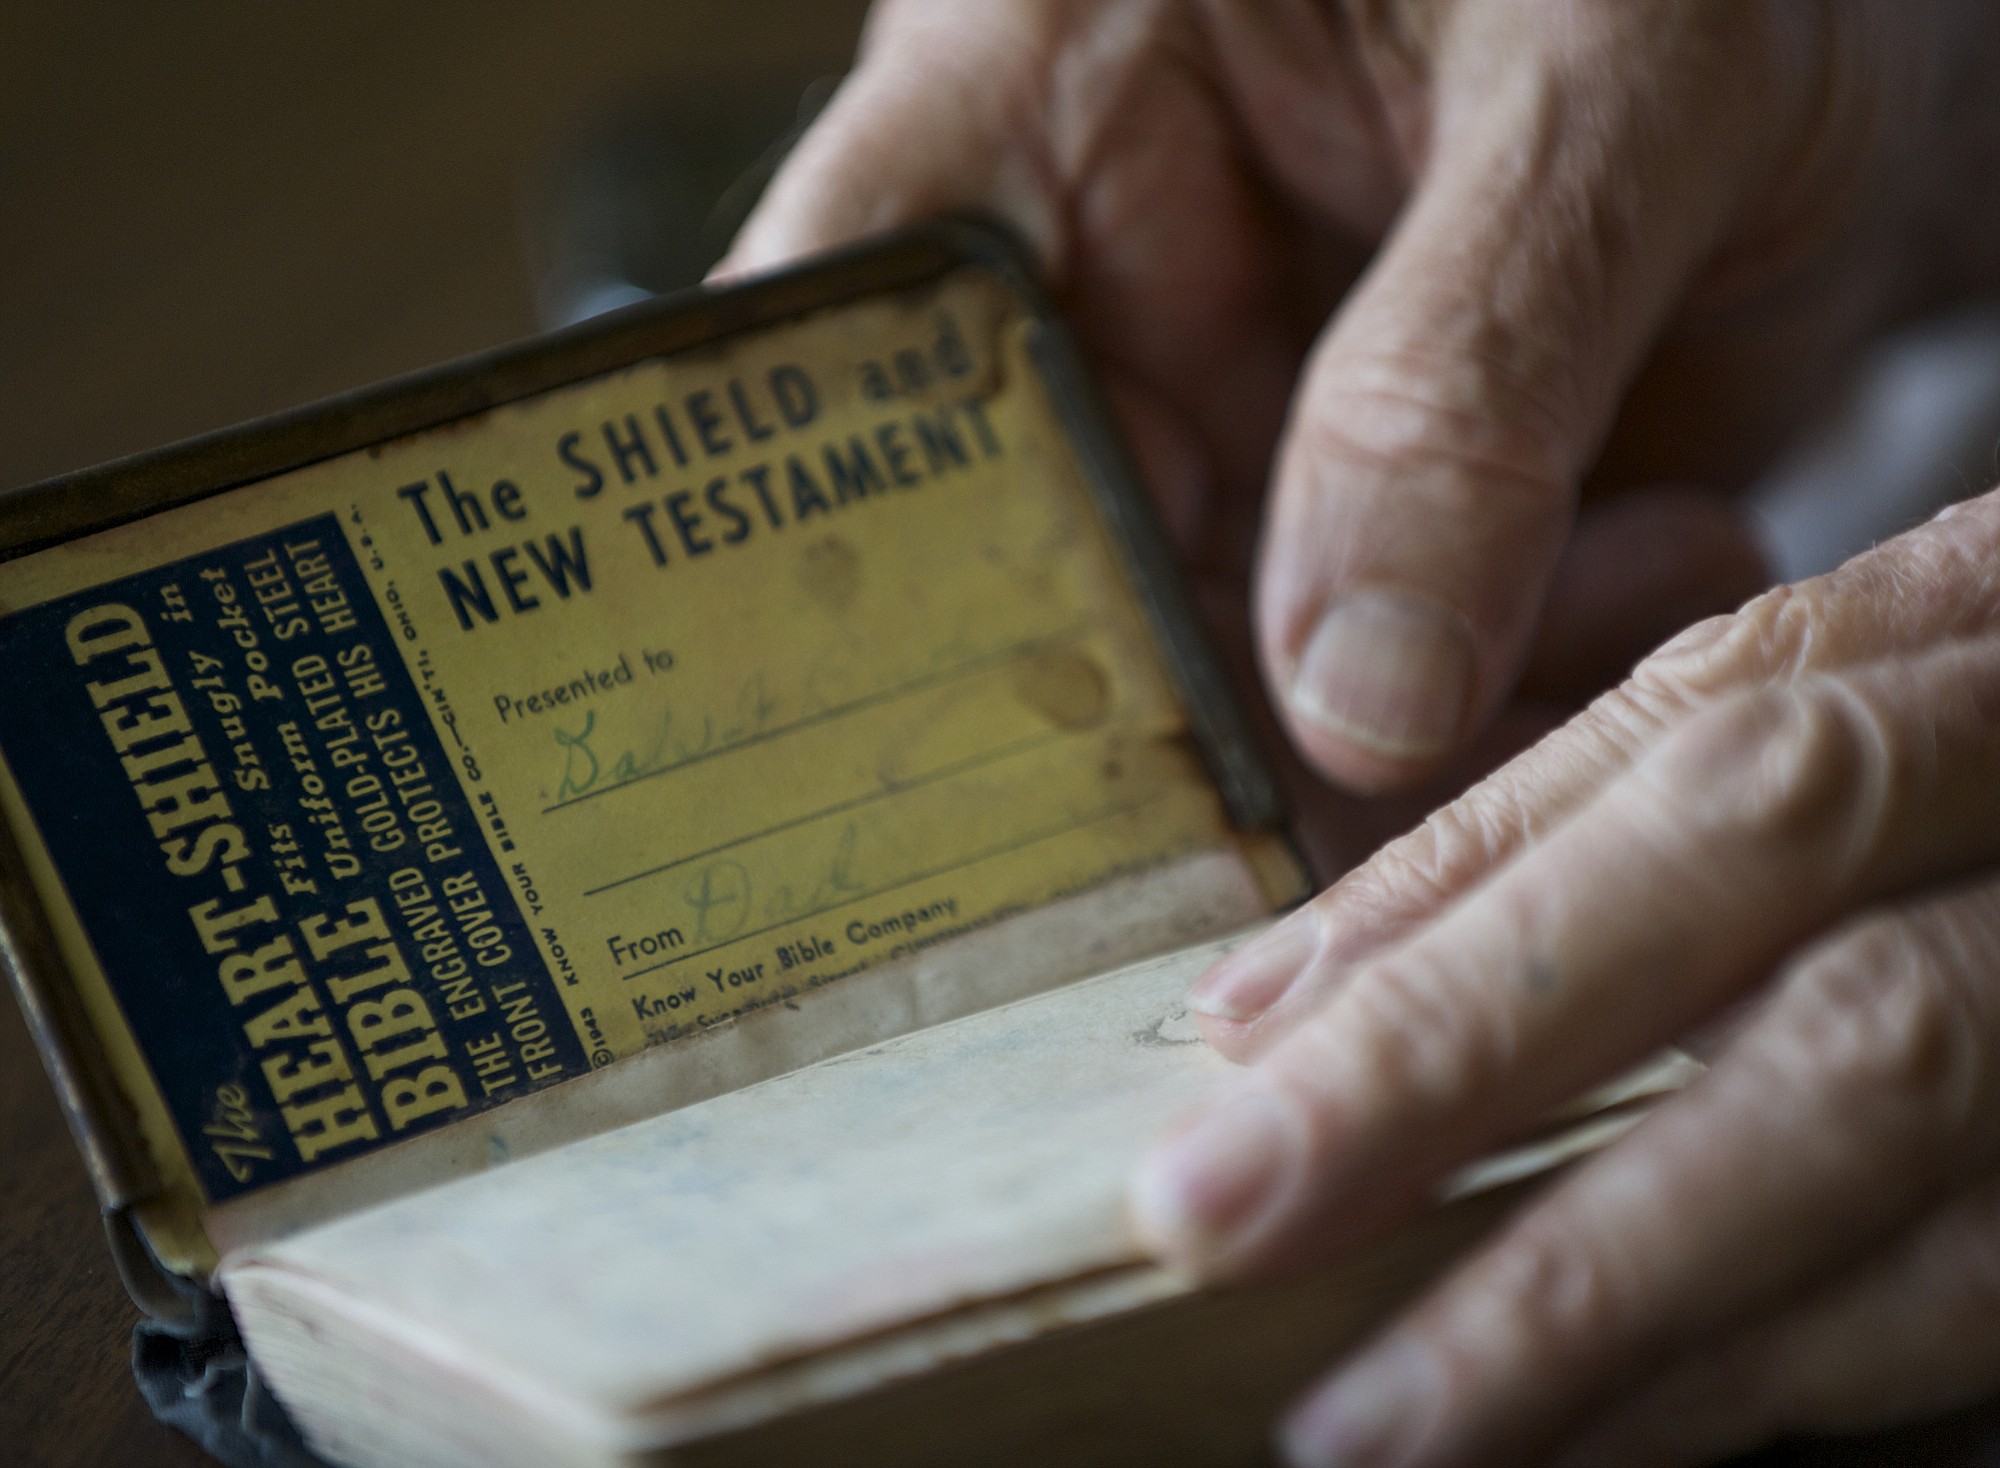 The New Testament his parents gave Dale Bowlin when he went off to war.